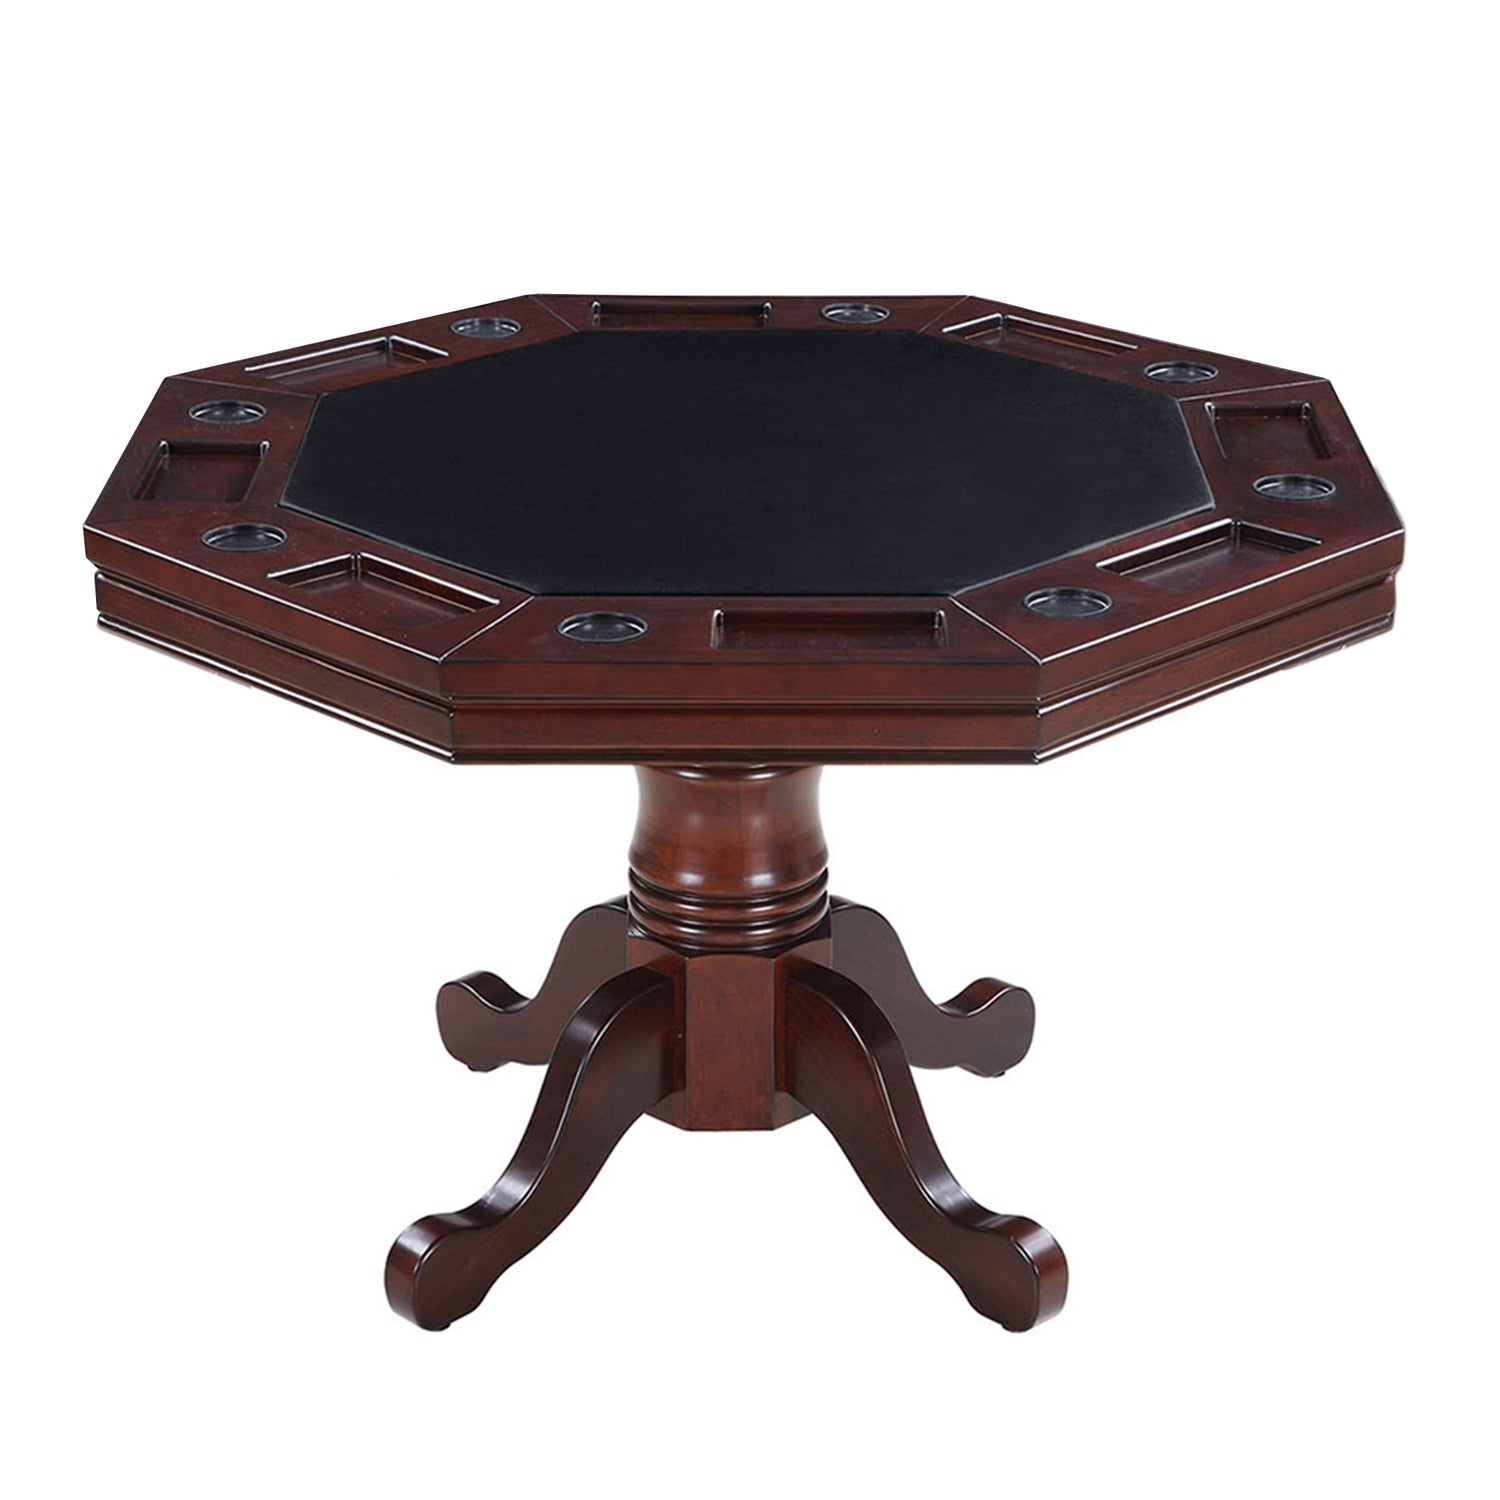 Hathaway Poker Tables